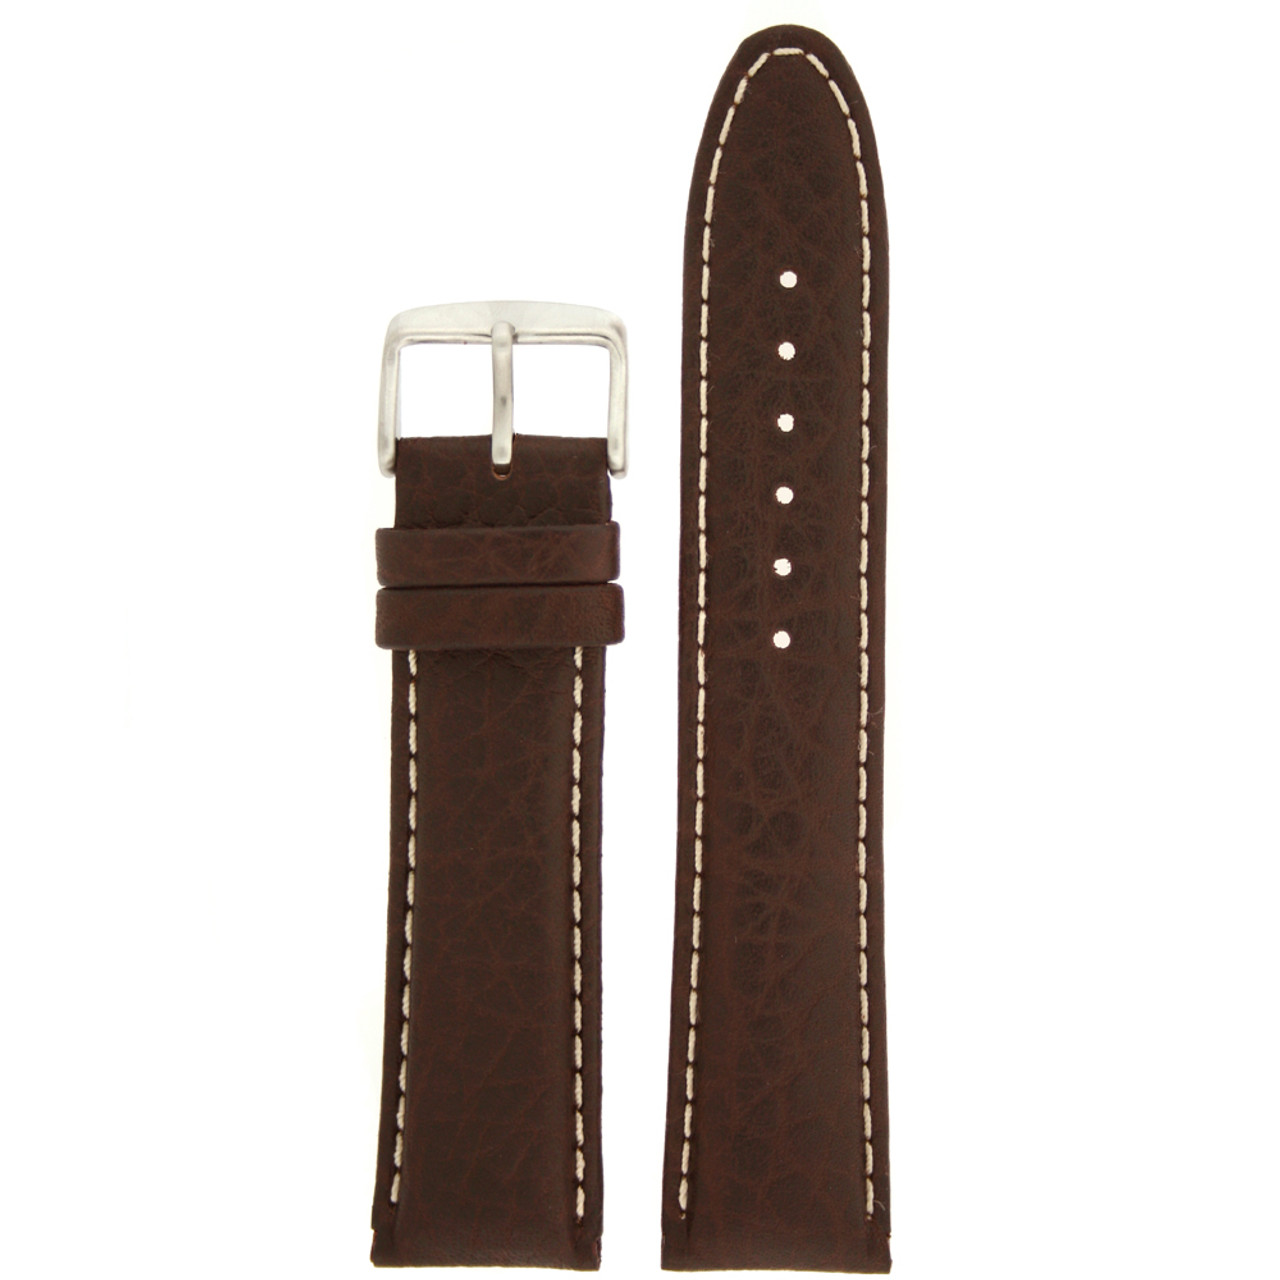 Leather Watch Band with Top Stitch Design in Brown - front view